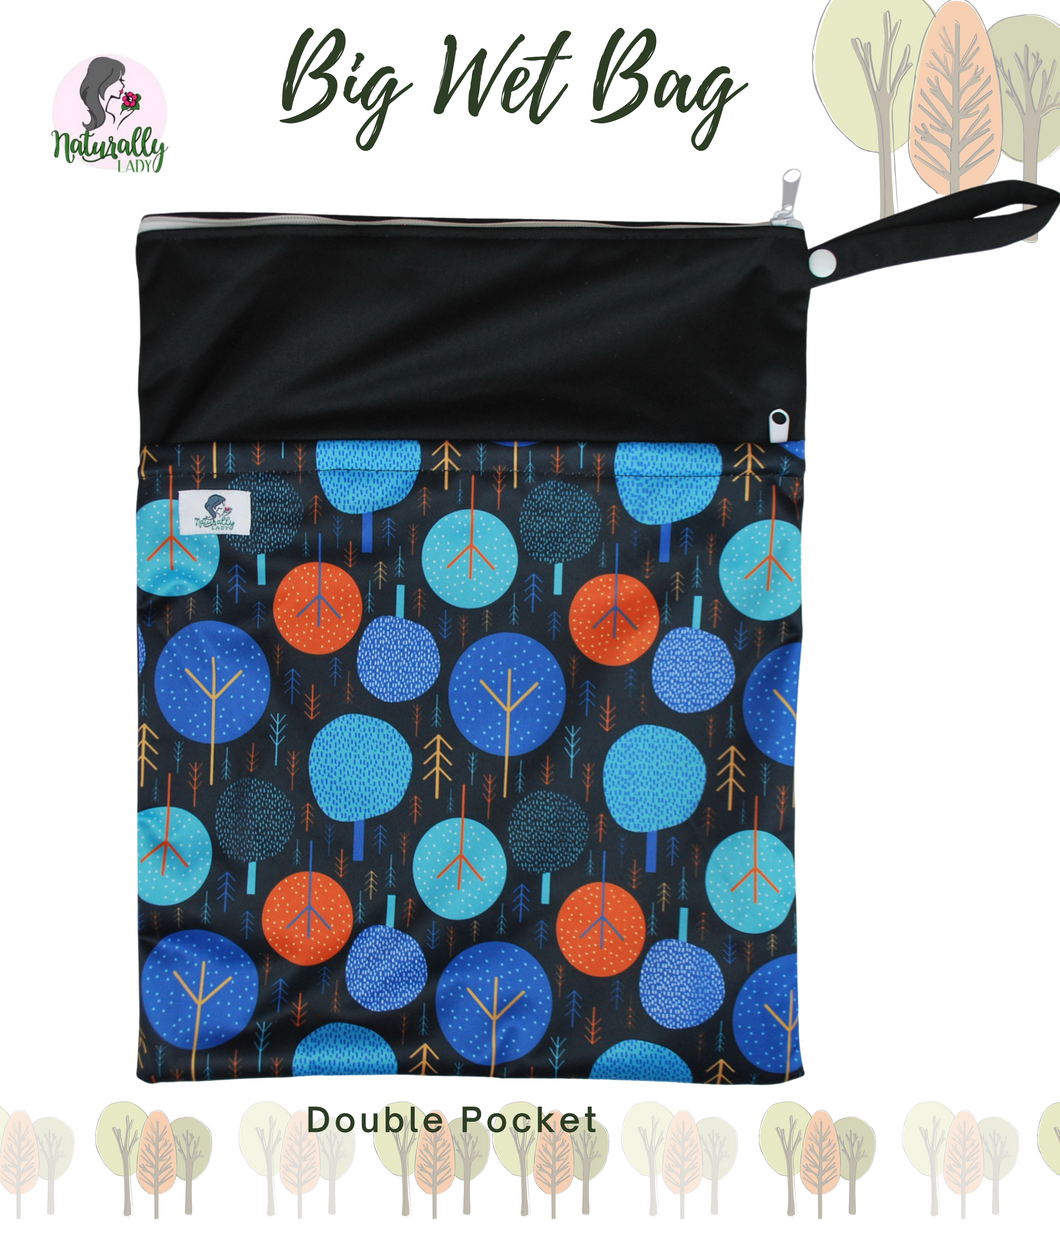 Big Wet Bag 30cm x 40cm Trees pattern for baby nappies or reusable cloth sanitary pads towels face masks - Eco zero waste - Double Pockets